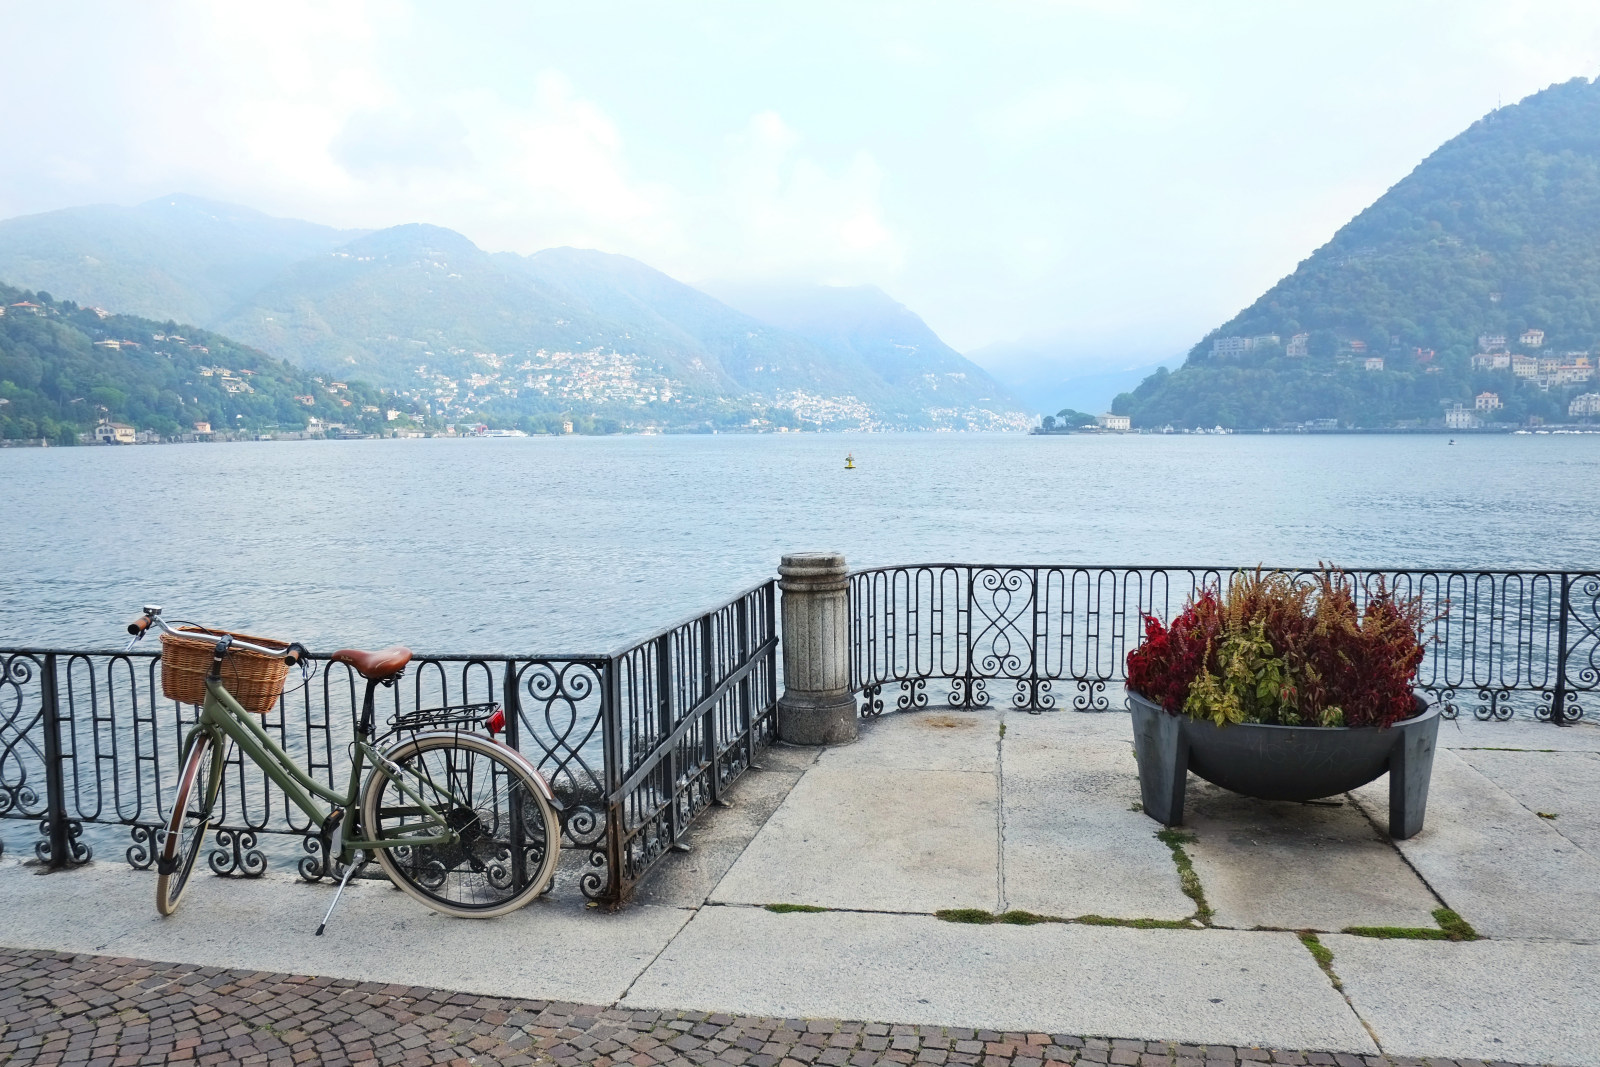 Lake Como from Como, Italy. Hotel and tourism photography by Kent Johnson at Hi-Fidelity 360.